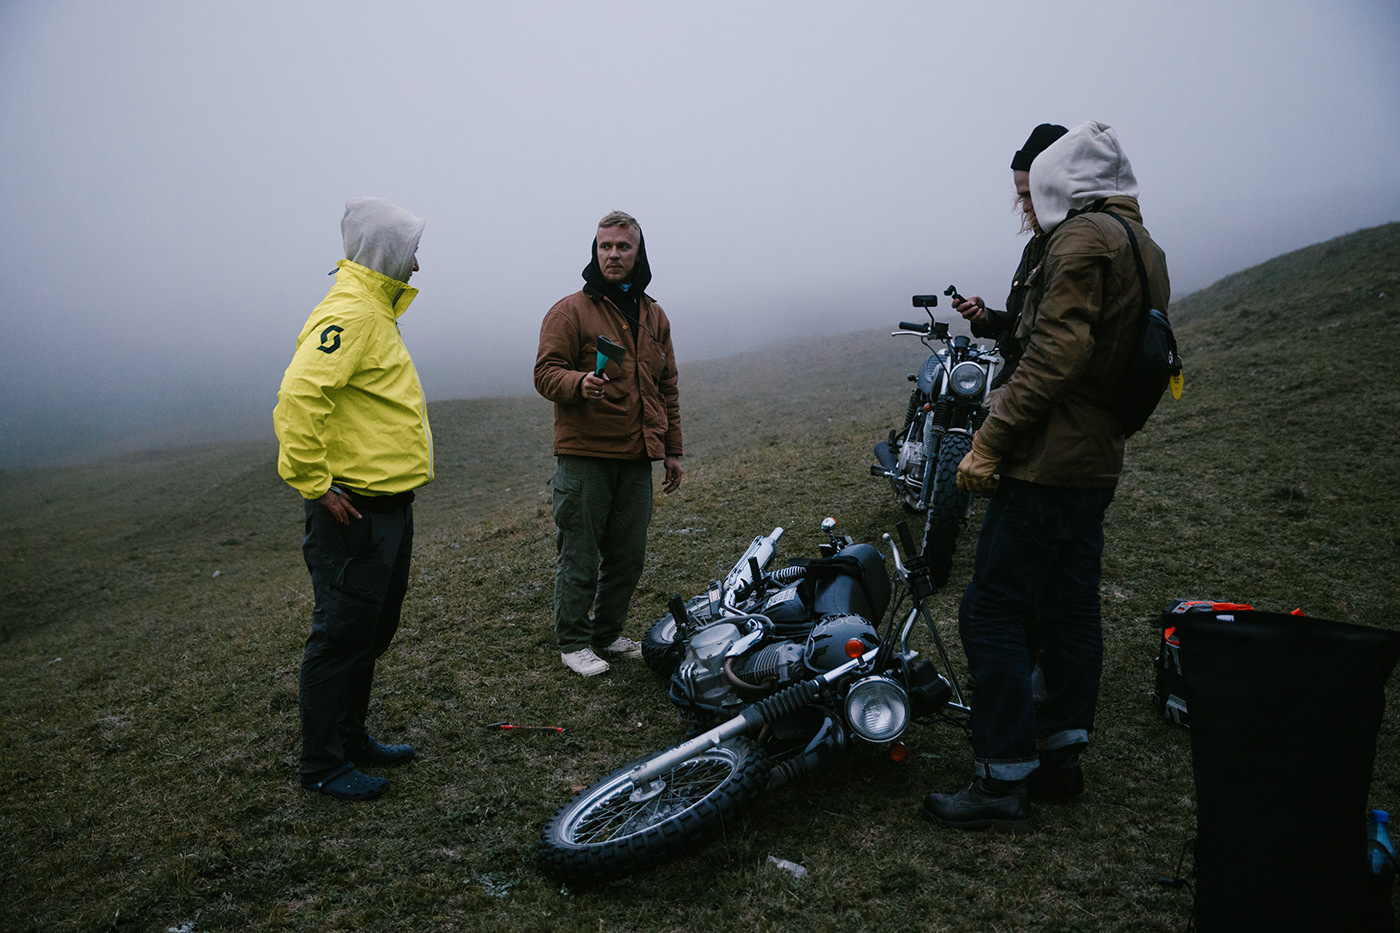 dagestan lifestyle motorcycles mototouring mountains Outdoor reportage Russia touring tourism